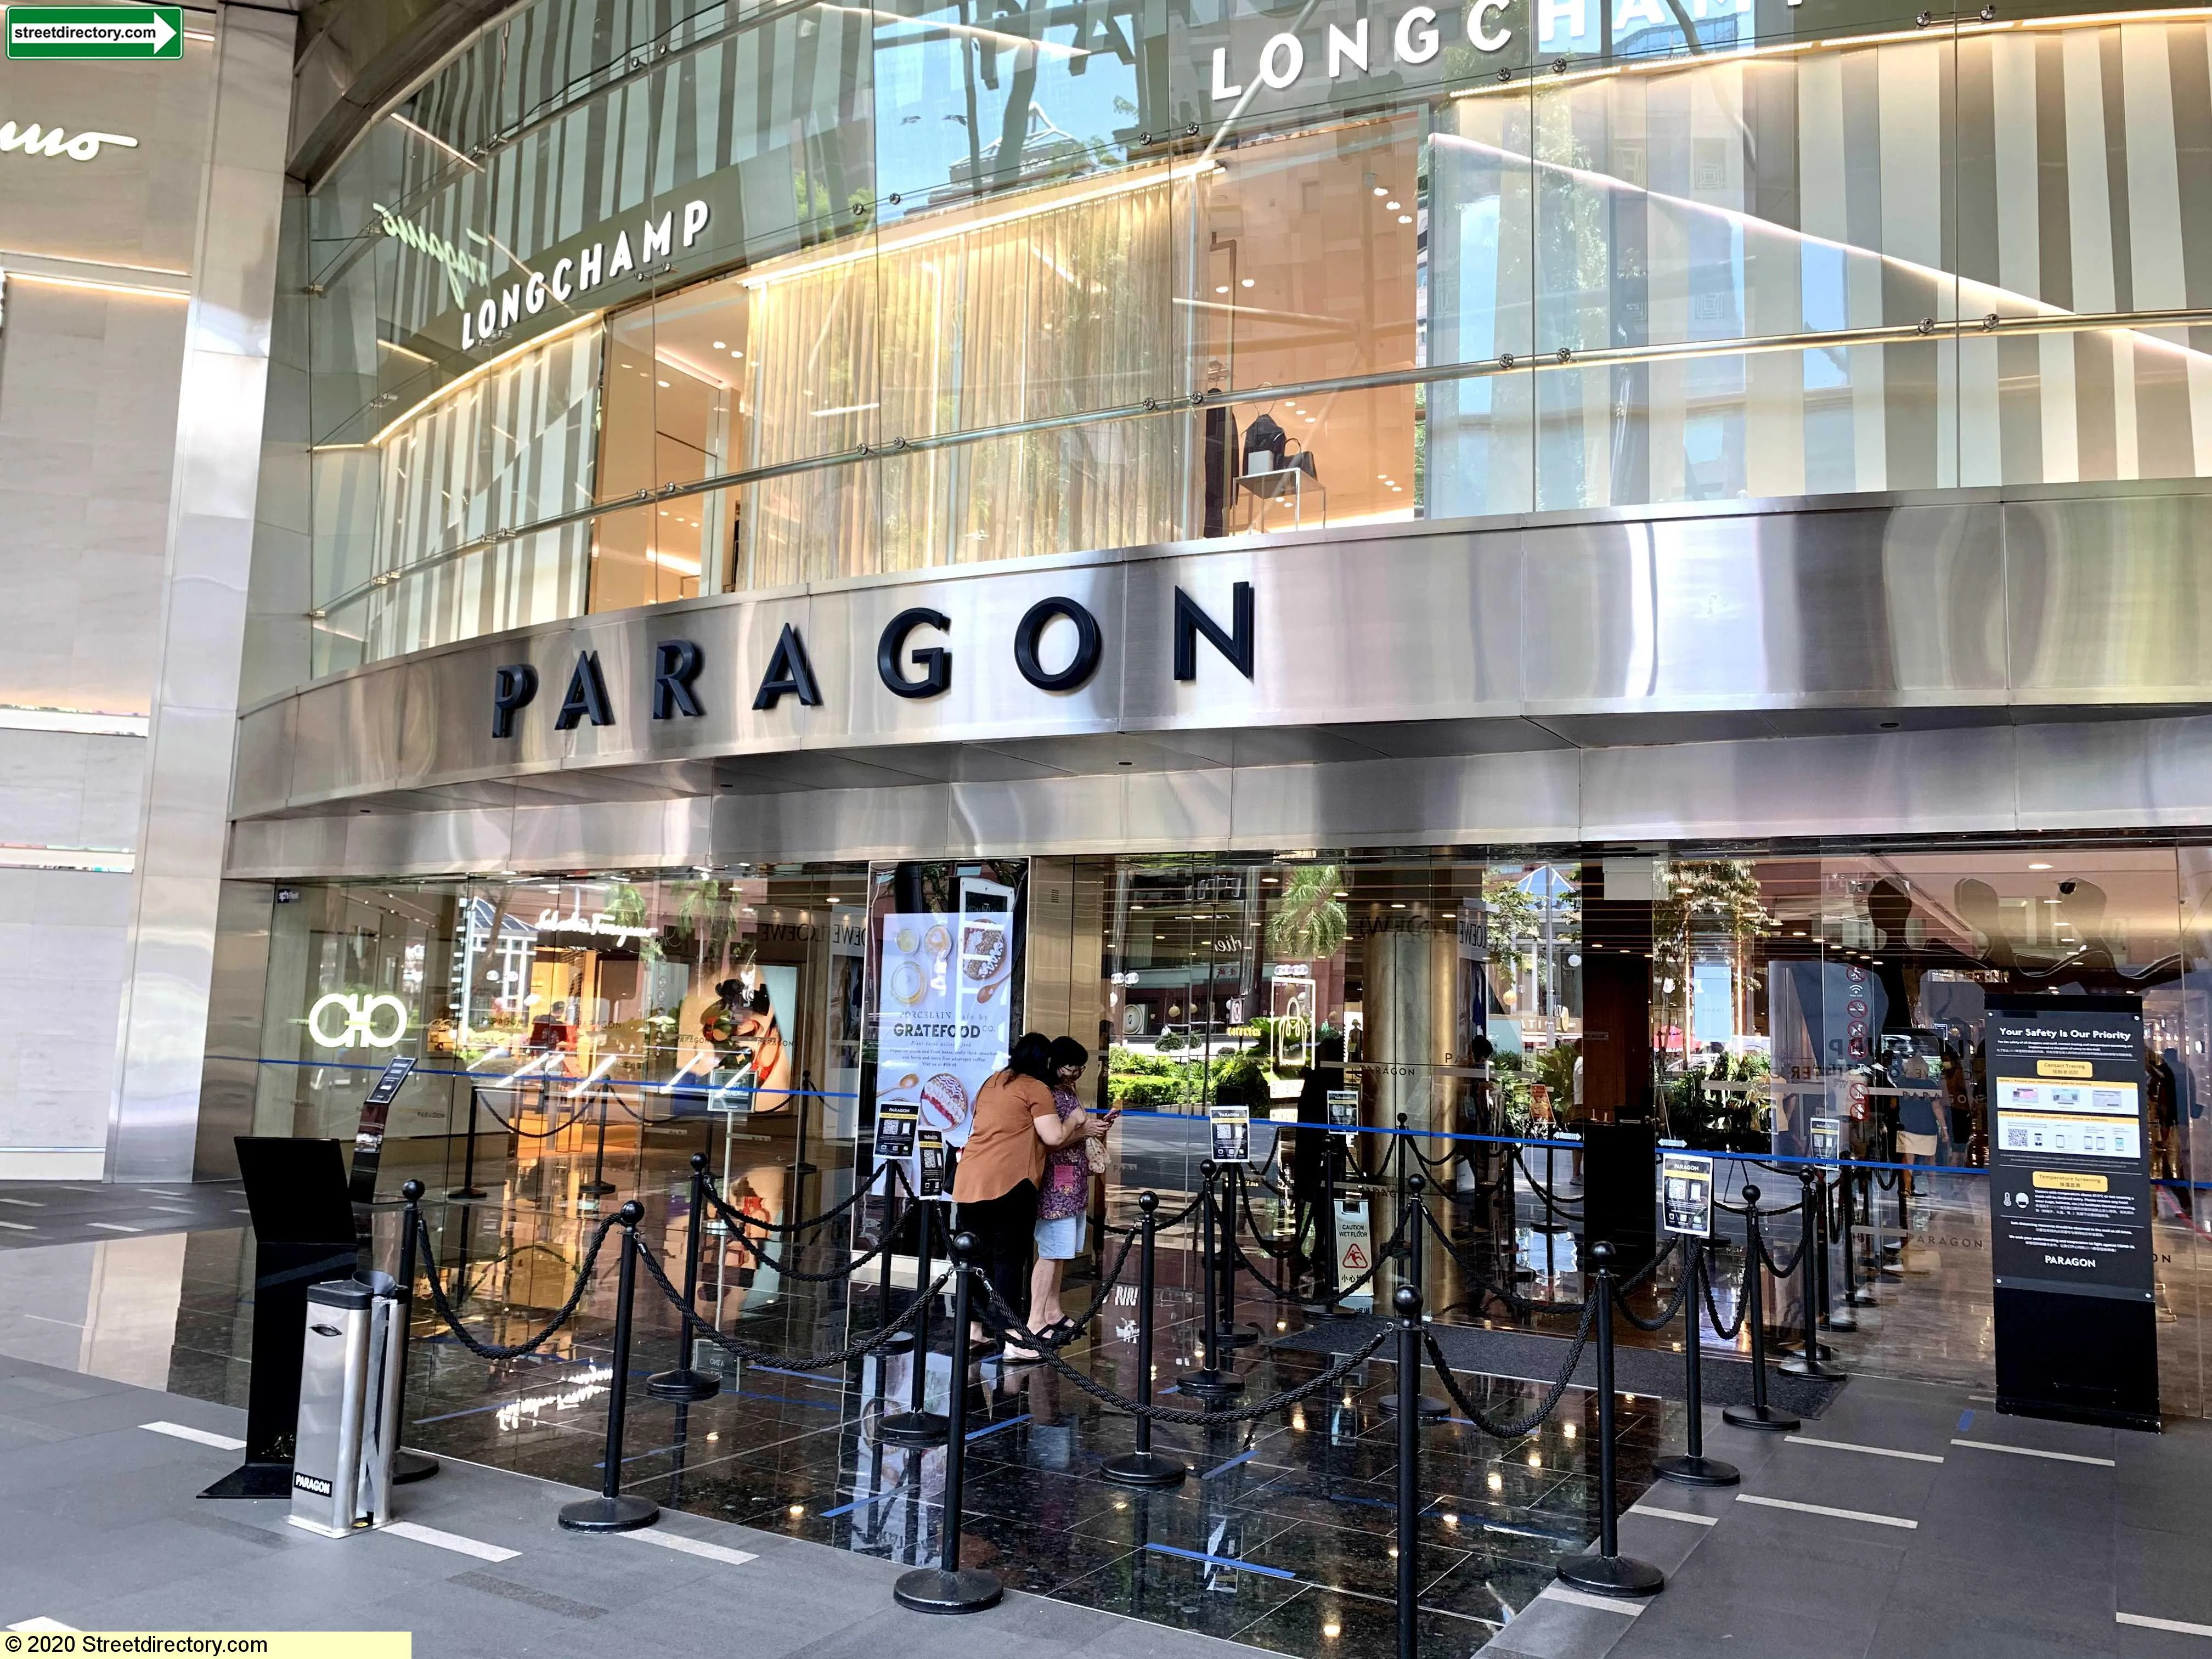 Paragon Shopping Centre in Singapore, central_asia | Fragrance,Shoes,Clothes,Cosmetics,Sportswear,Jewelry - Country Helper